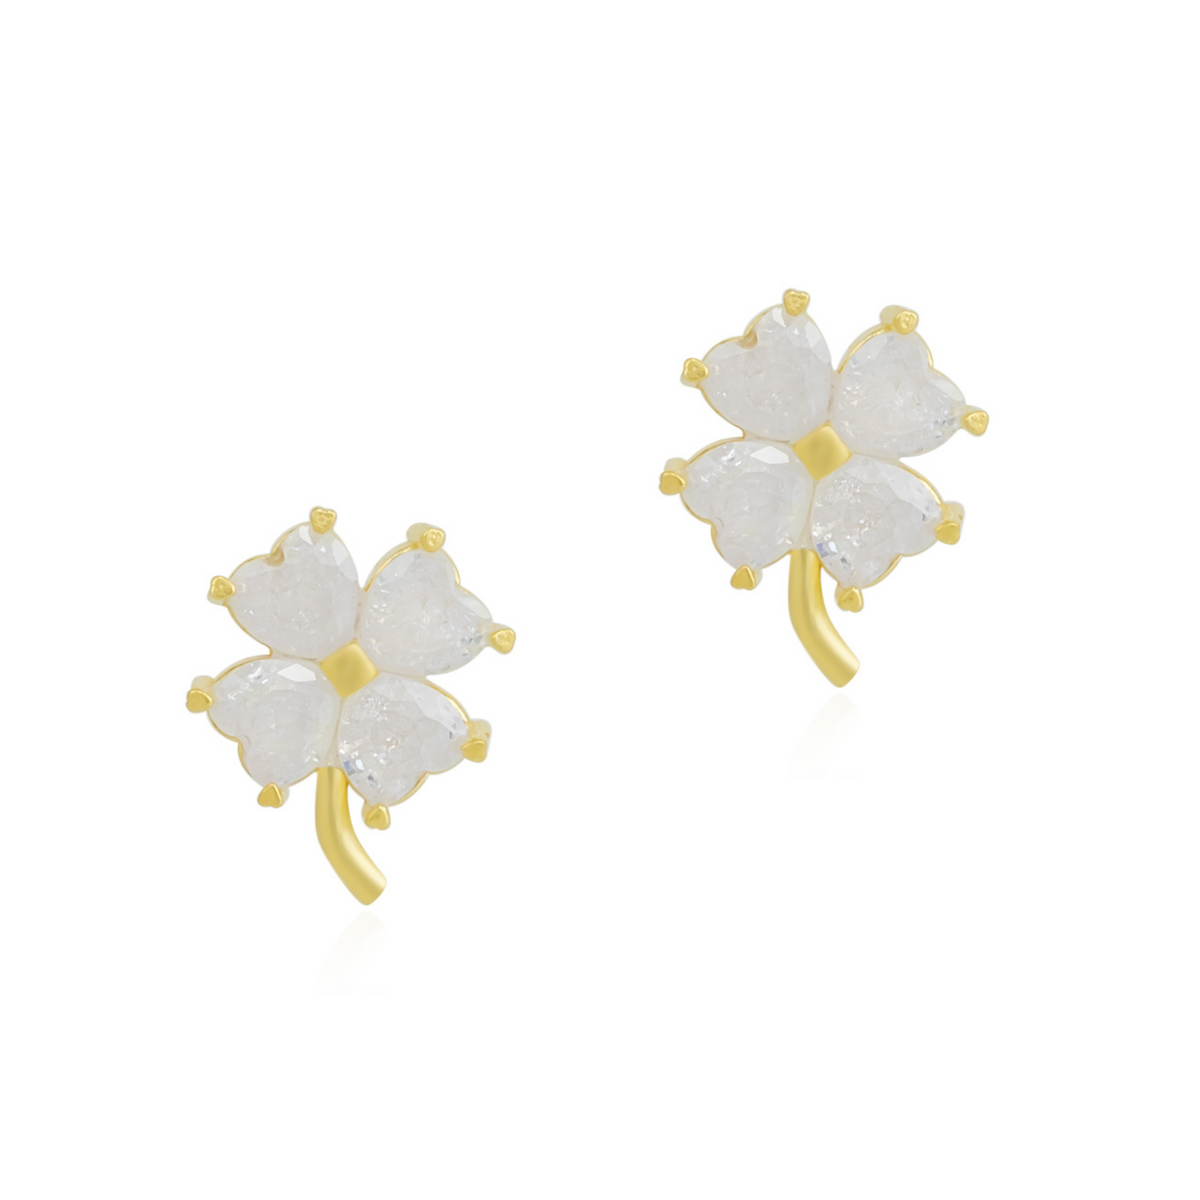 Four Leaf Clover Sterling Silver Stud Earring - White